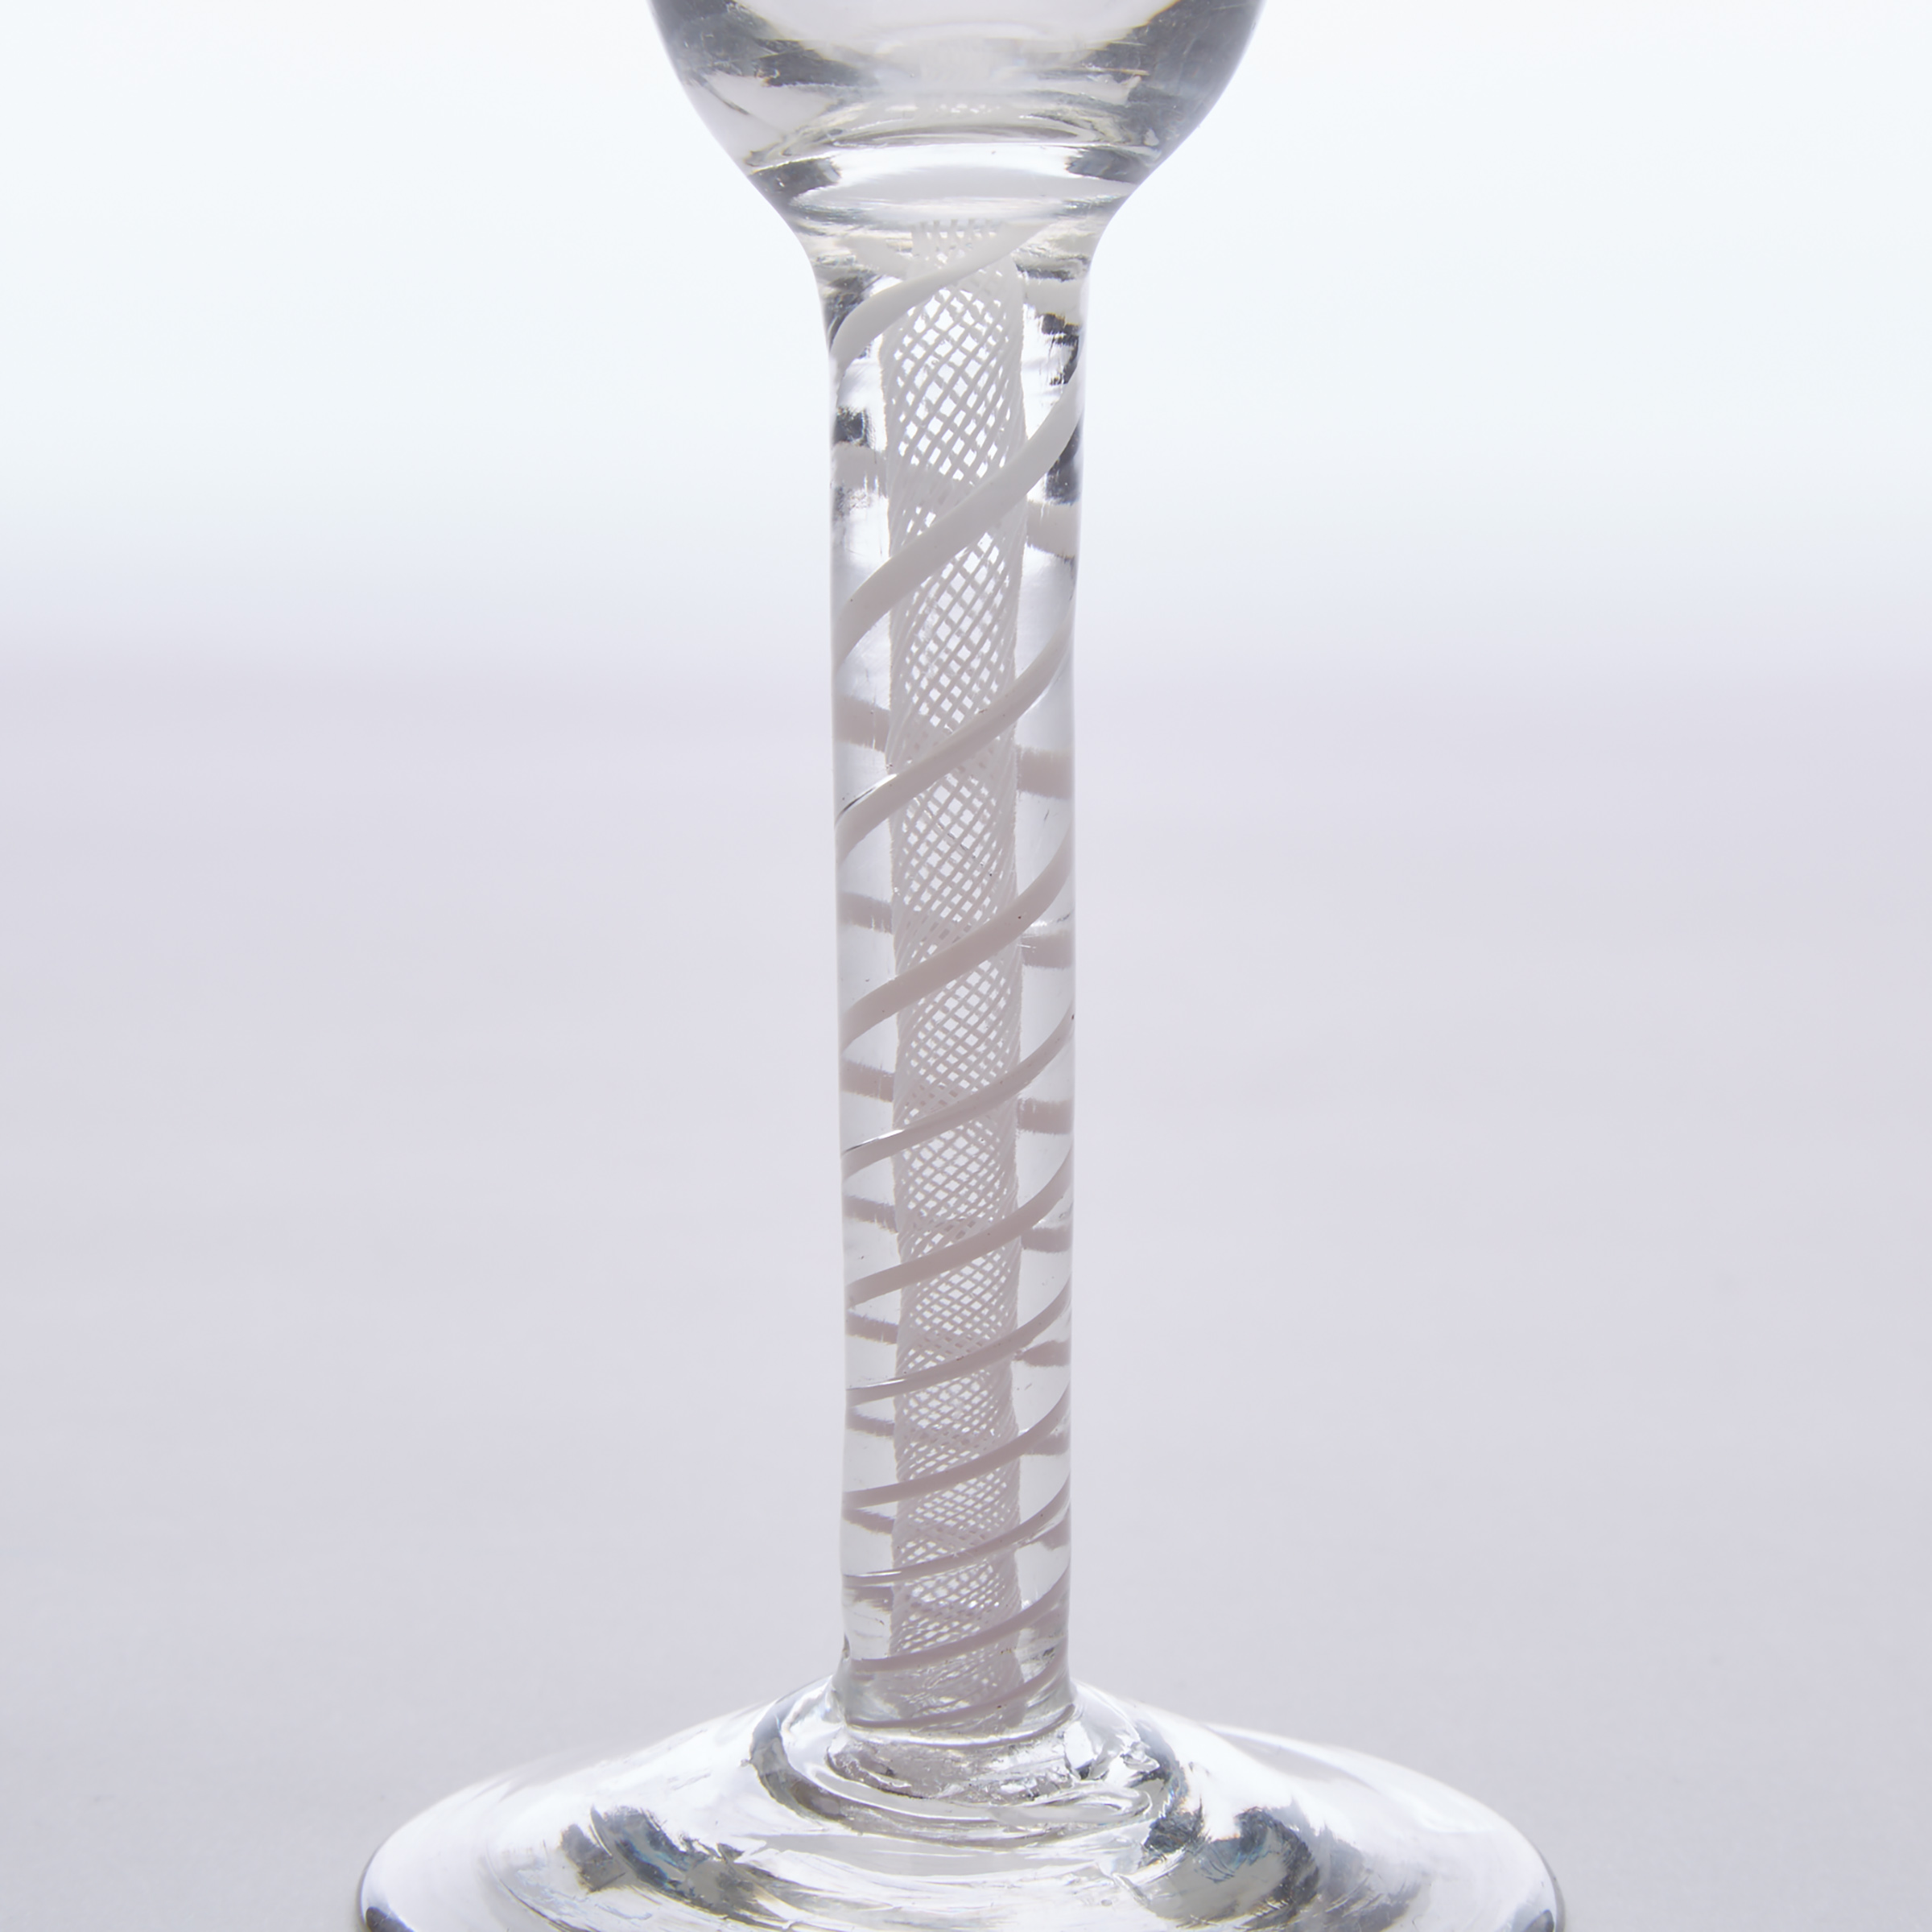 English Engraved Opaque Twist Stemmed Wine Glass, c.1760-80